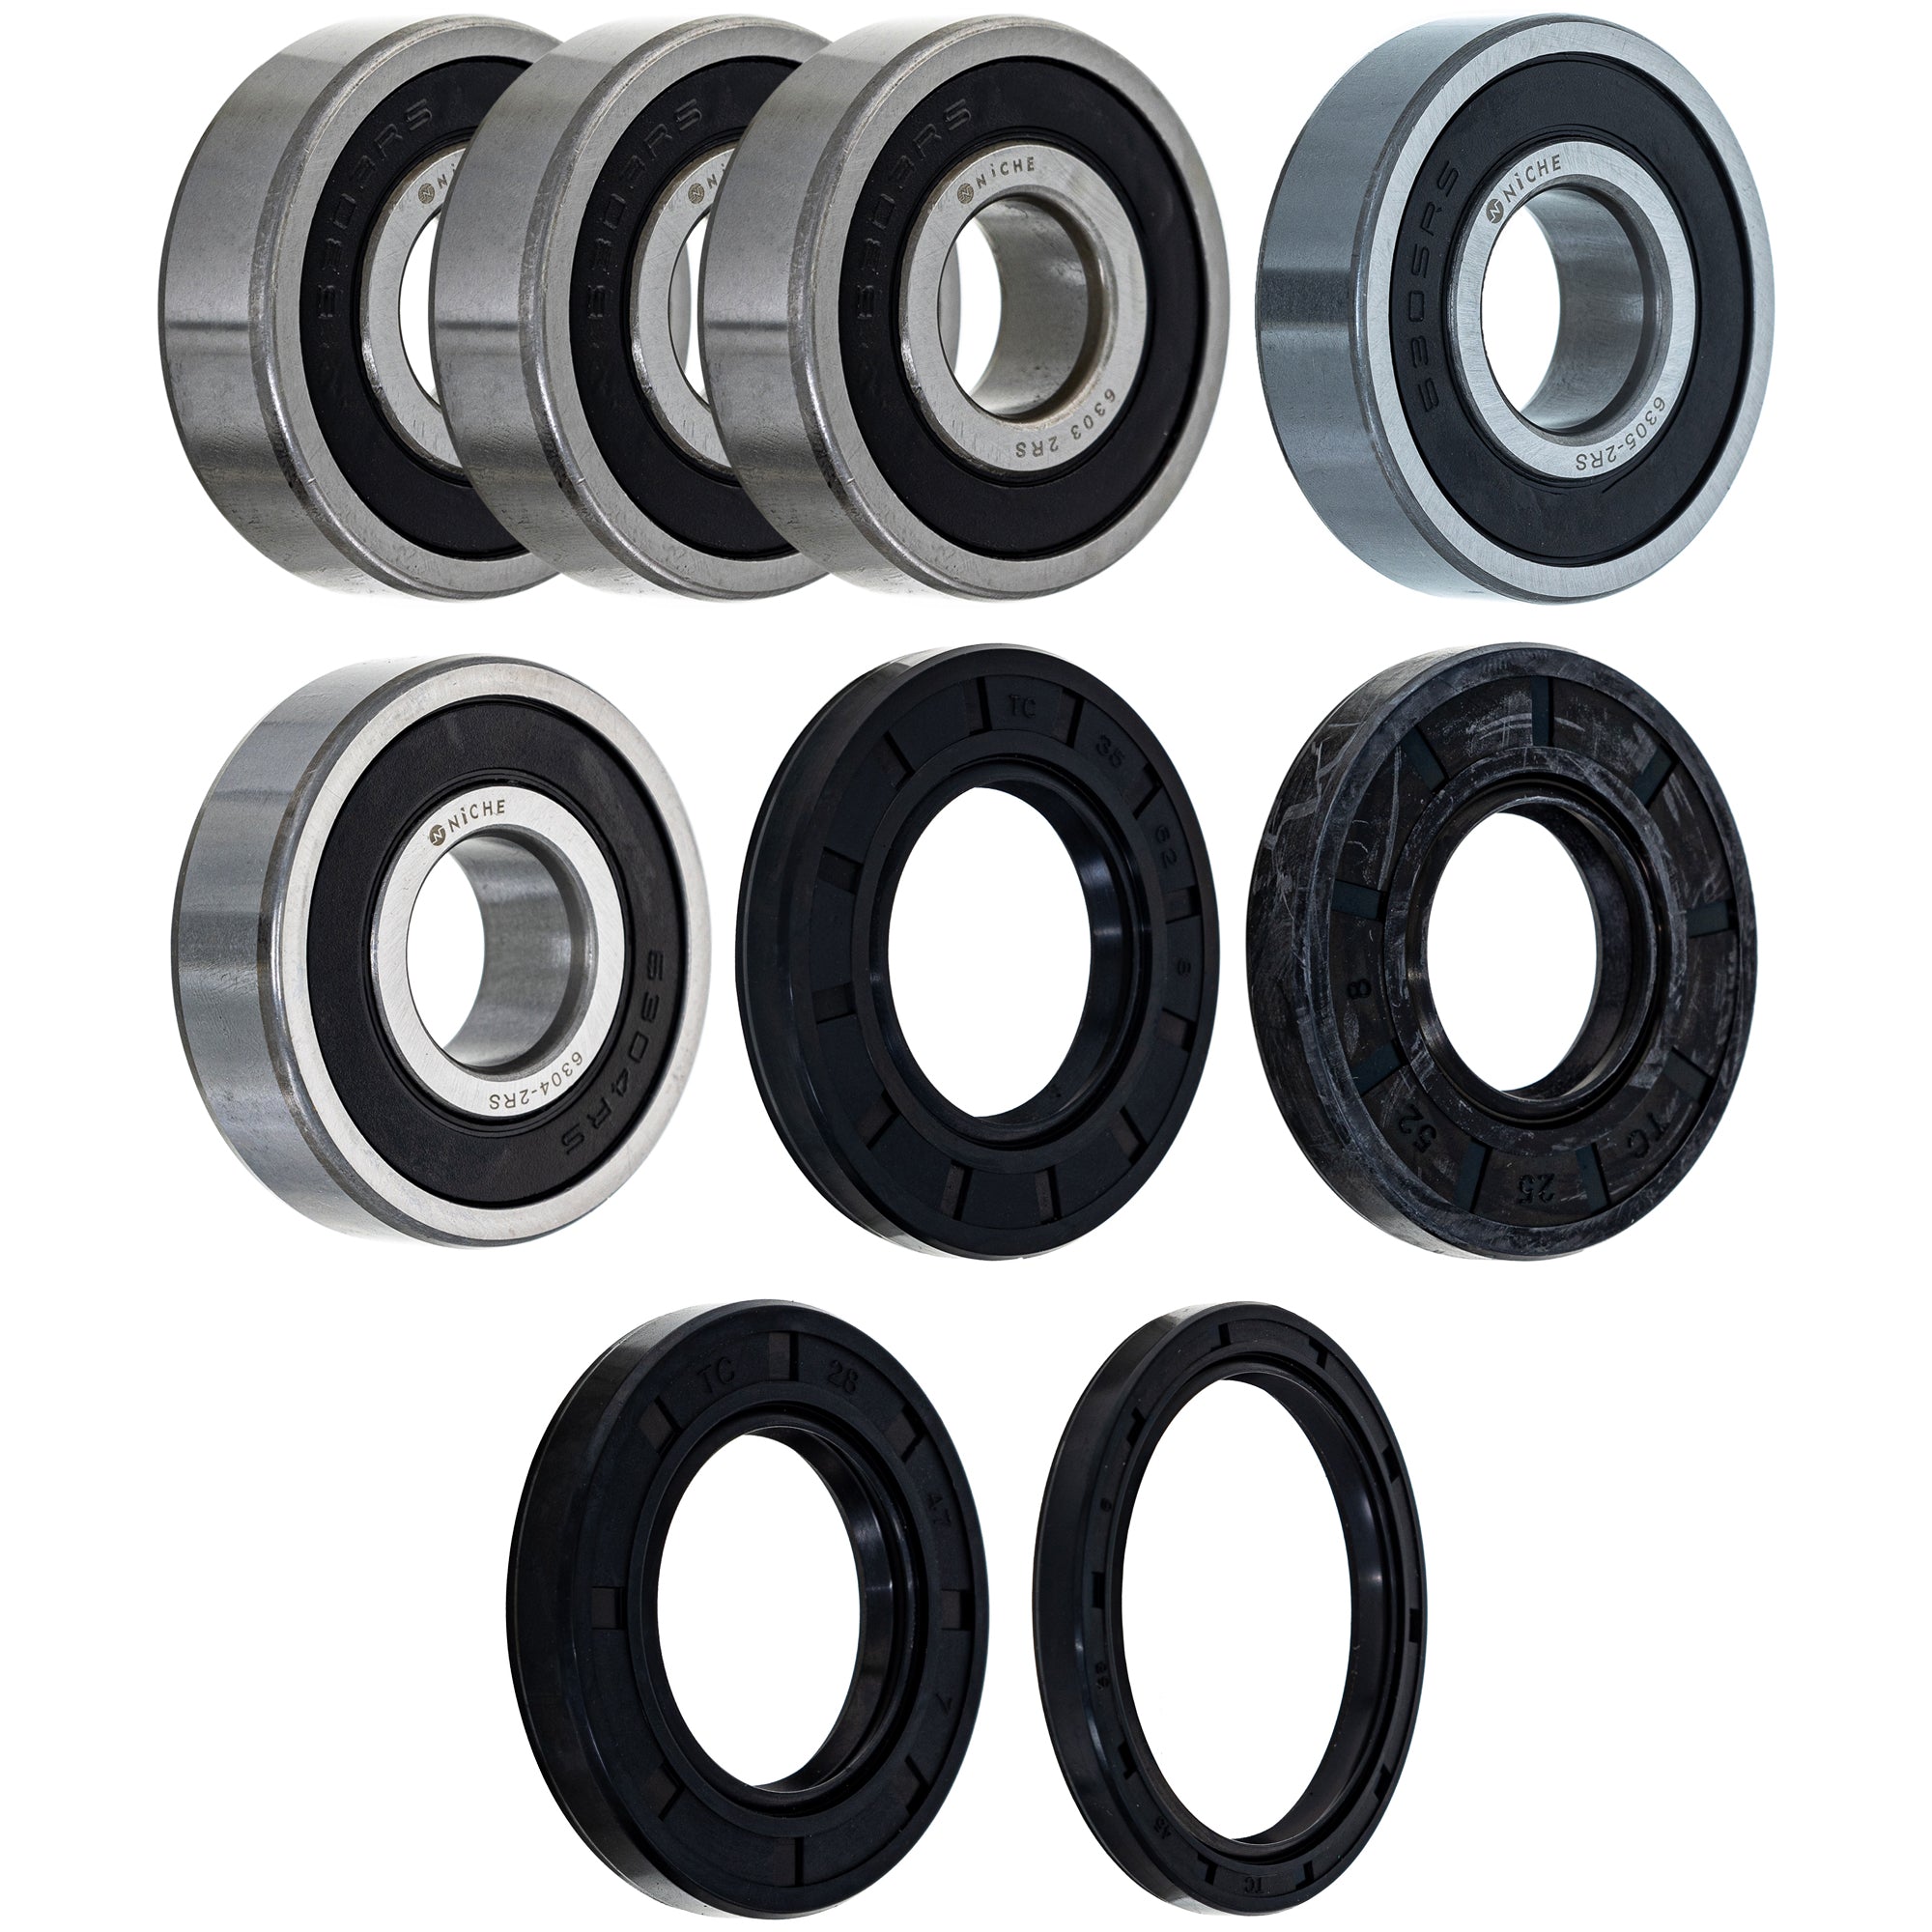 Wheel Bearing Seal Kit for zOTHER Ref No XS650S2 XS650S XS650 TX750 NICHE MK1008654